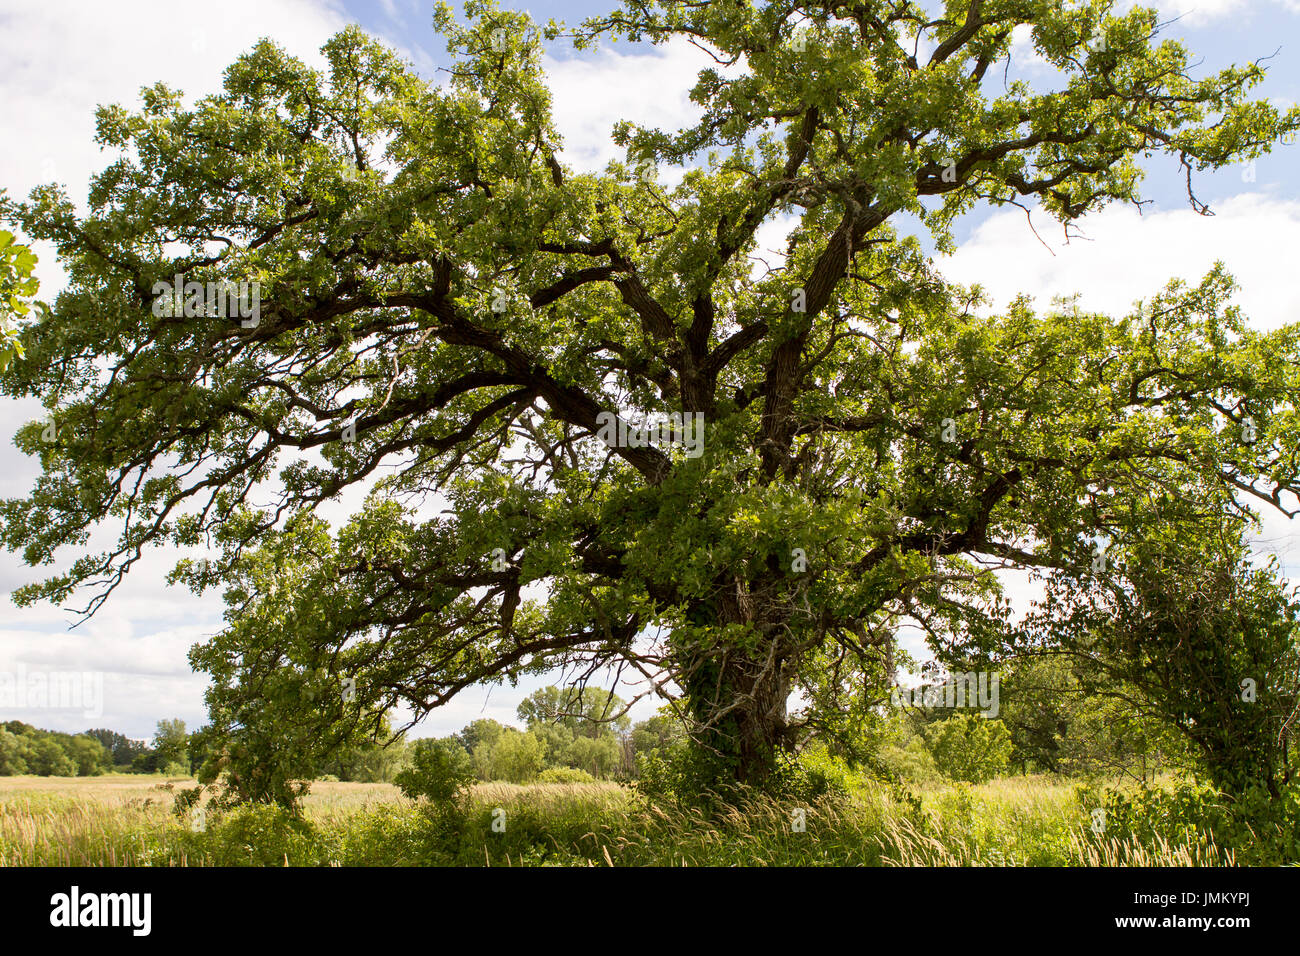 Oak tree in prairie during summer with blue sky Stock Photo